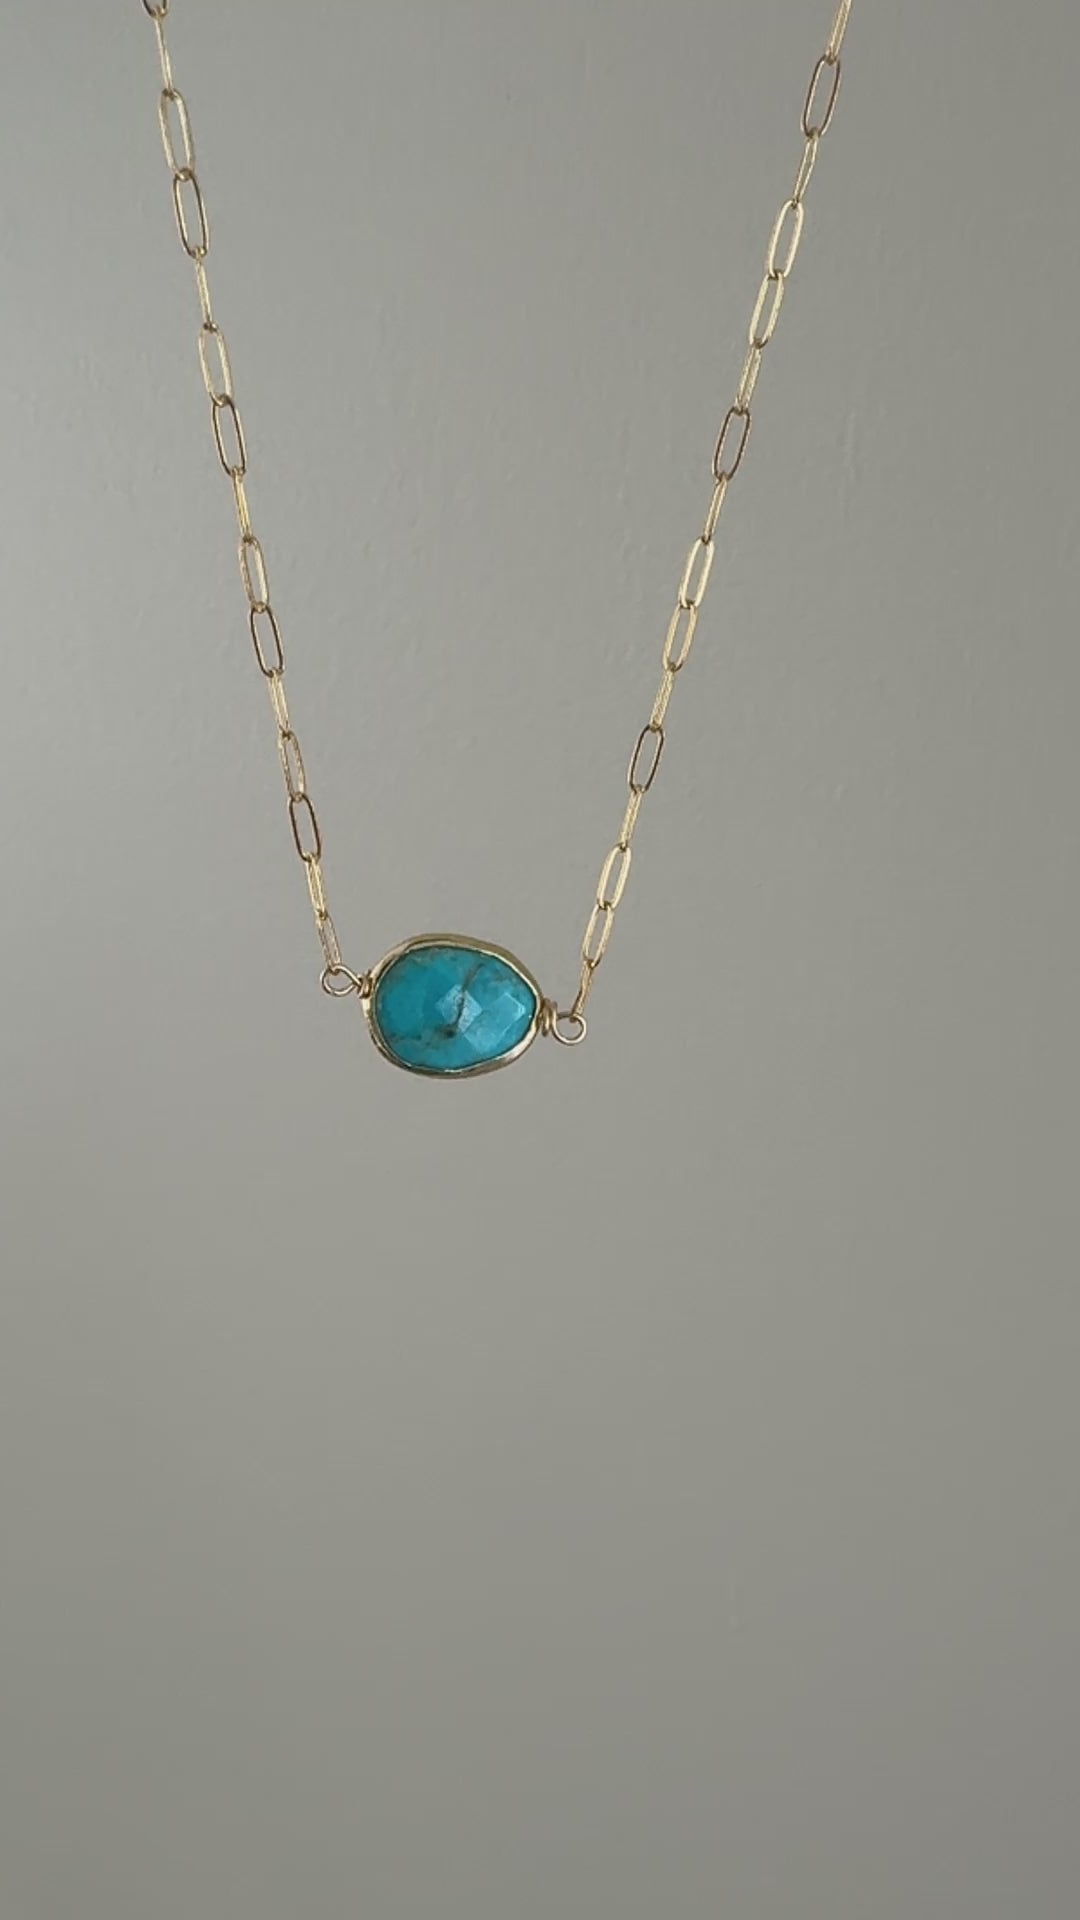 The Turquoise Nugget Necklace